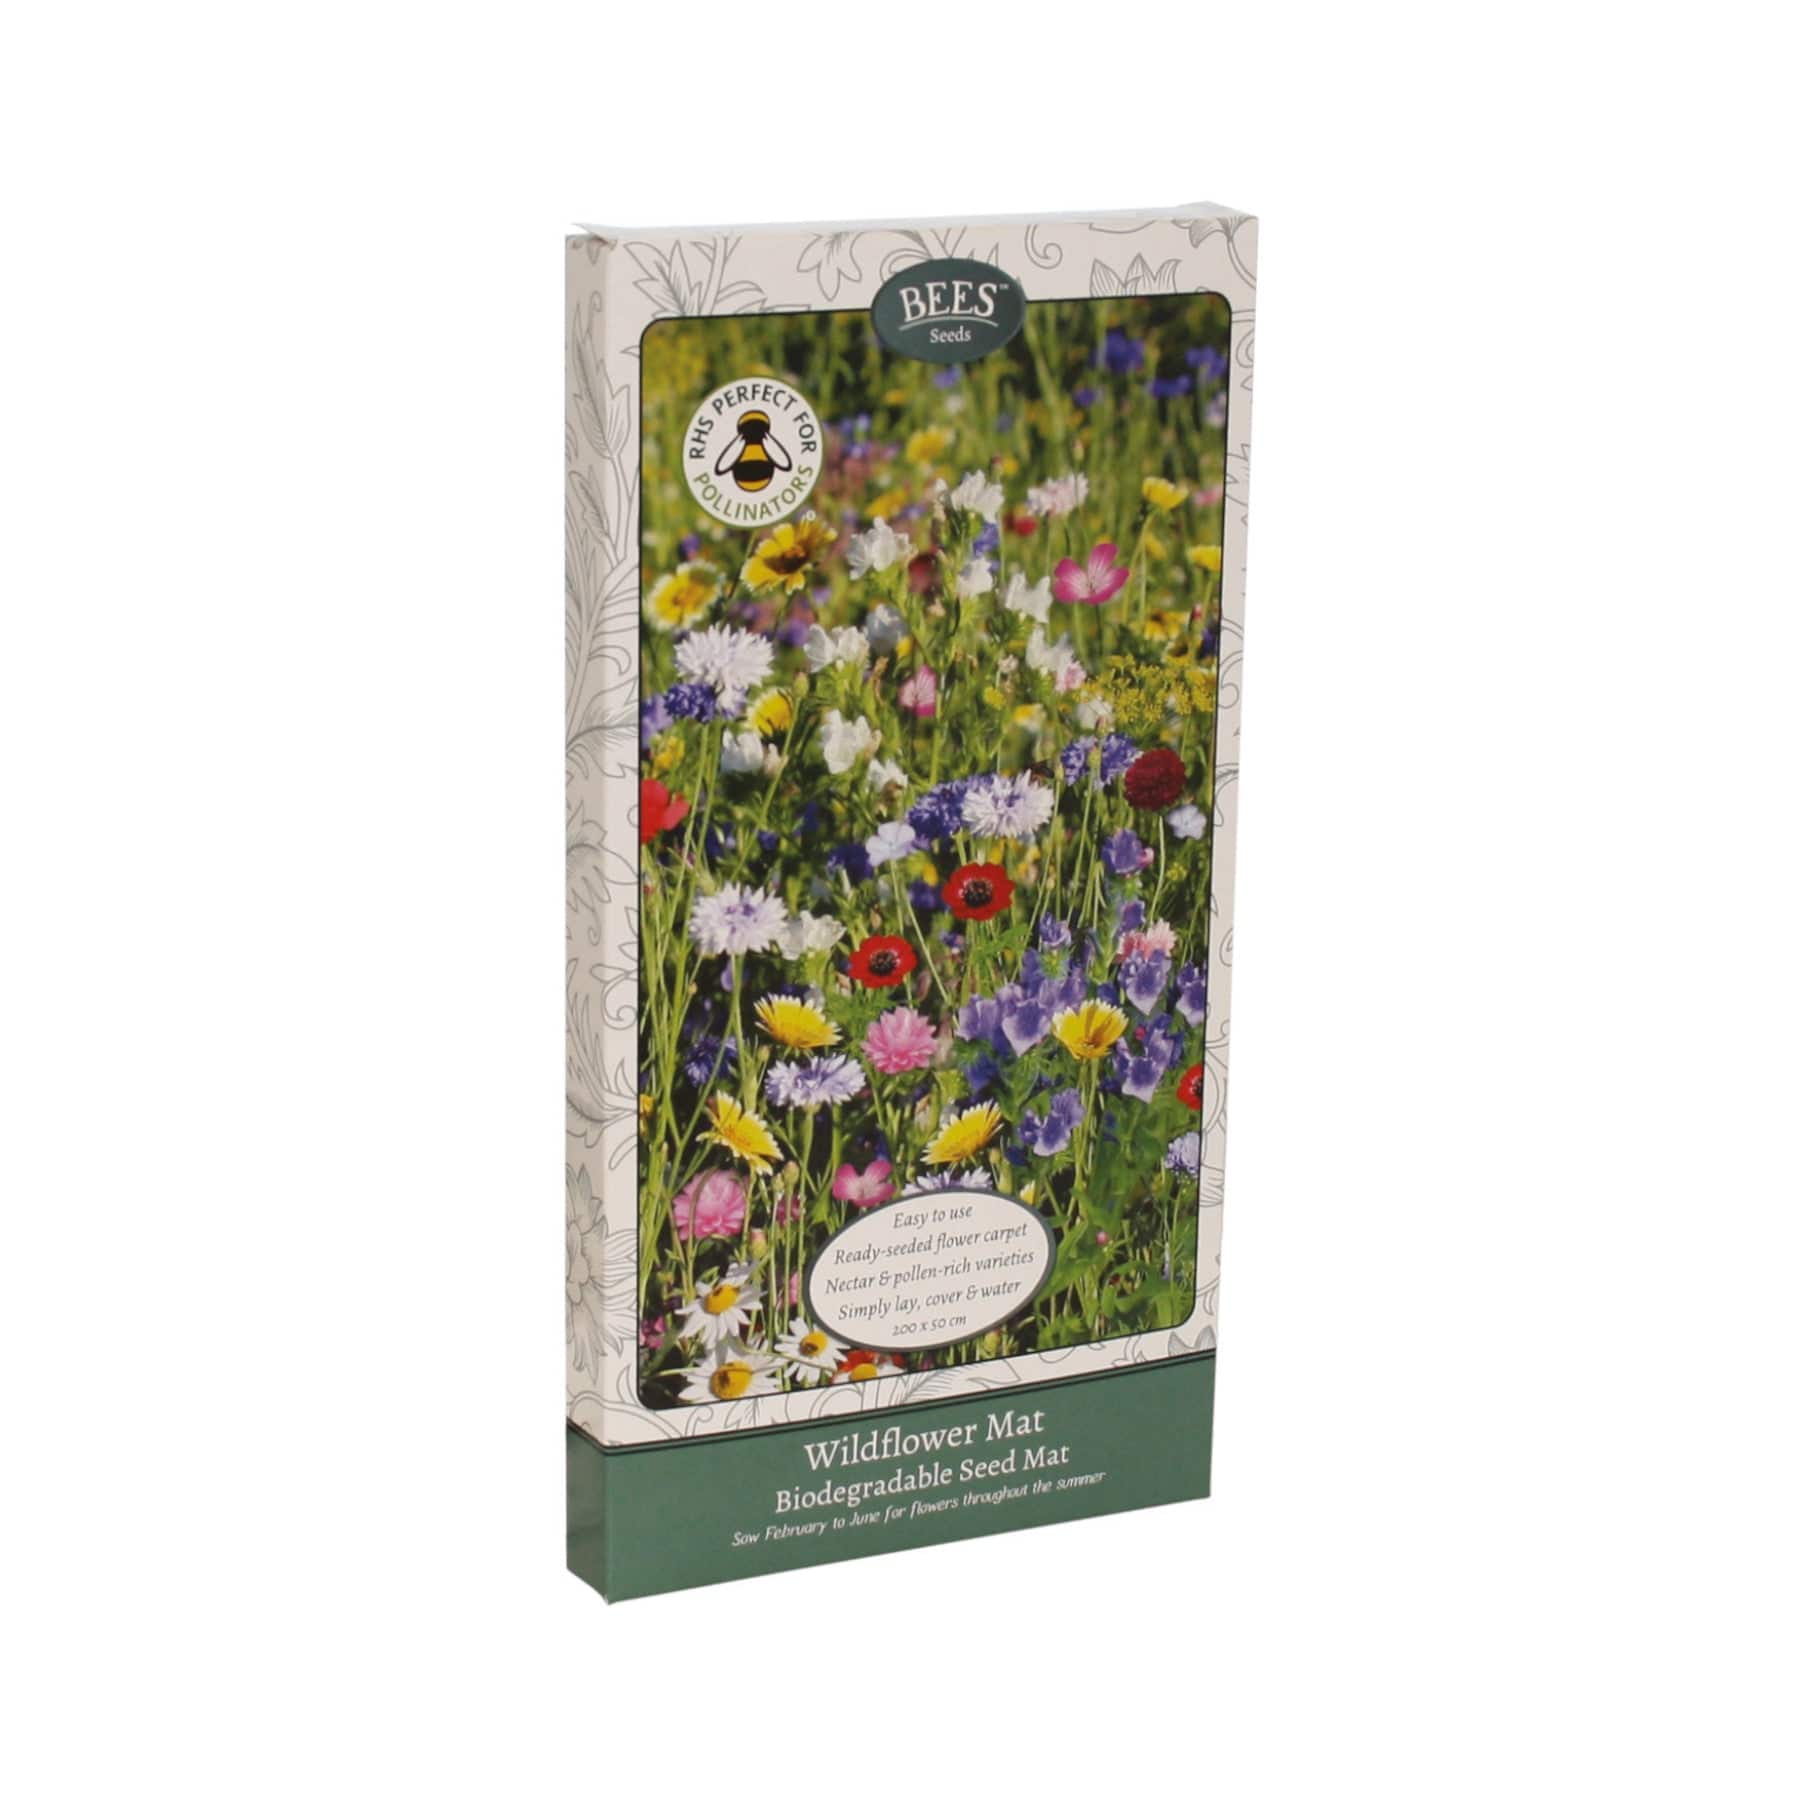 Wildflower seed mat packaging with vibrant field of various flowers, bee-friendly garden product, biodegradable seed mat, easy to use, perfect for pollinators